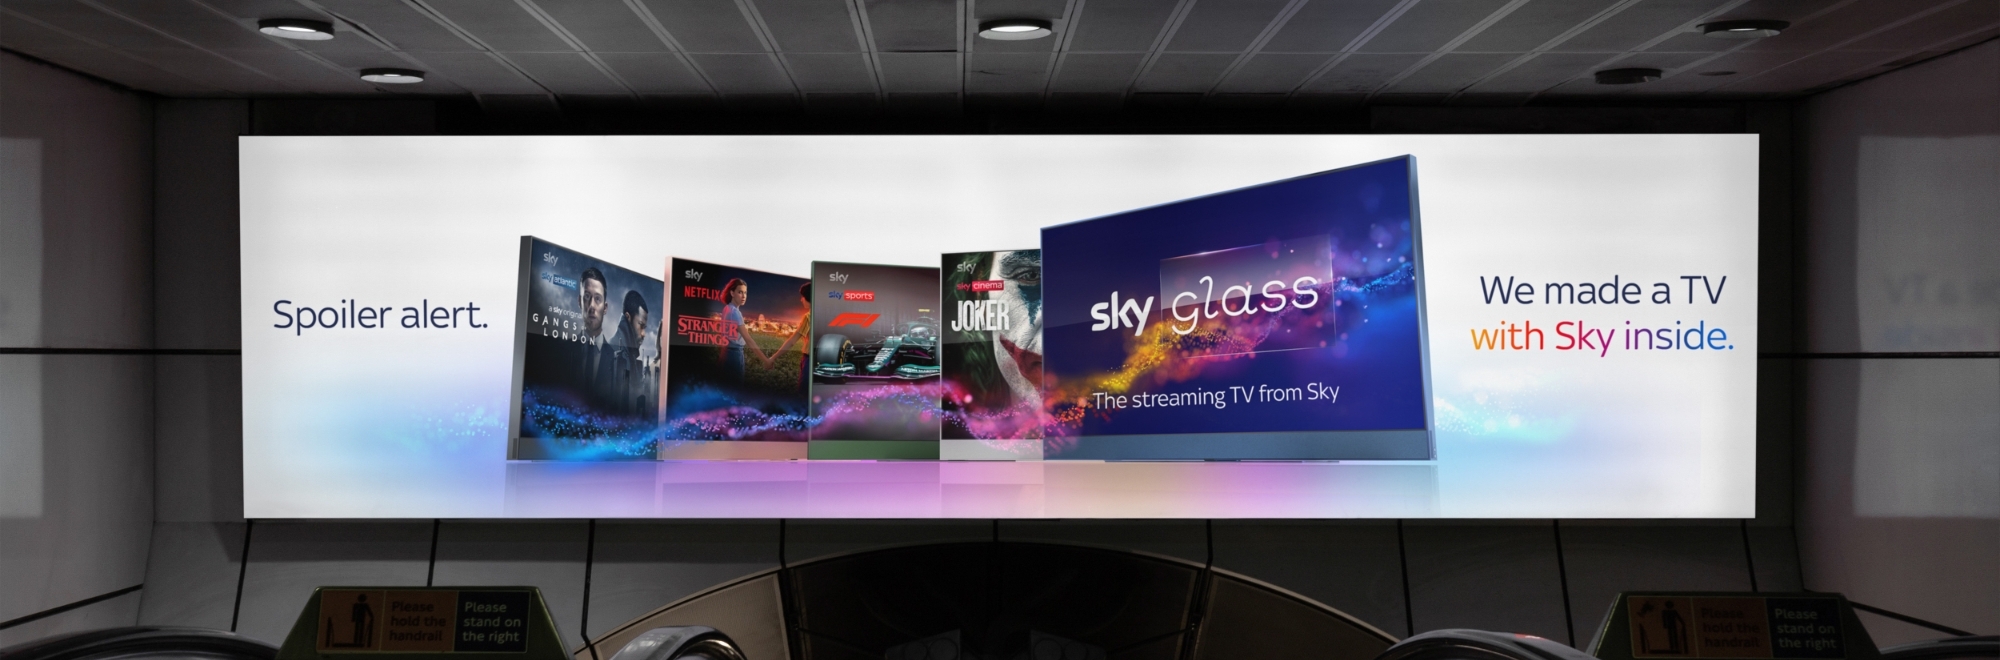 Sky launches streaming TV with Sky Glass